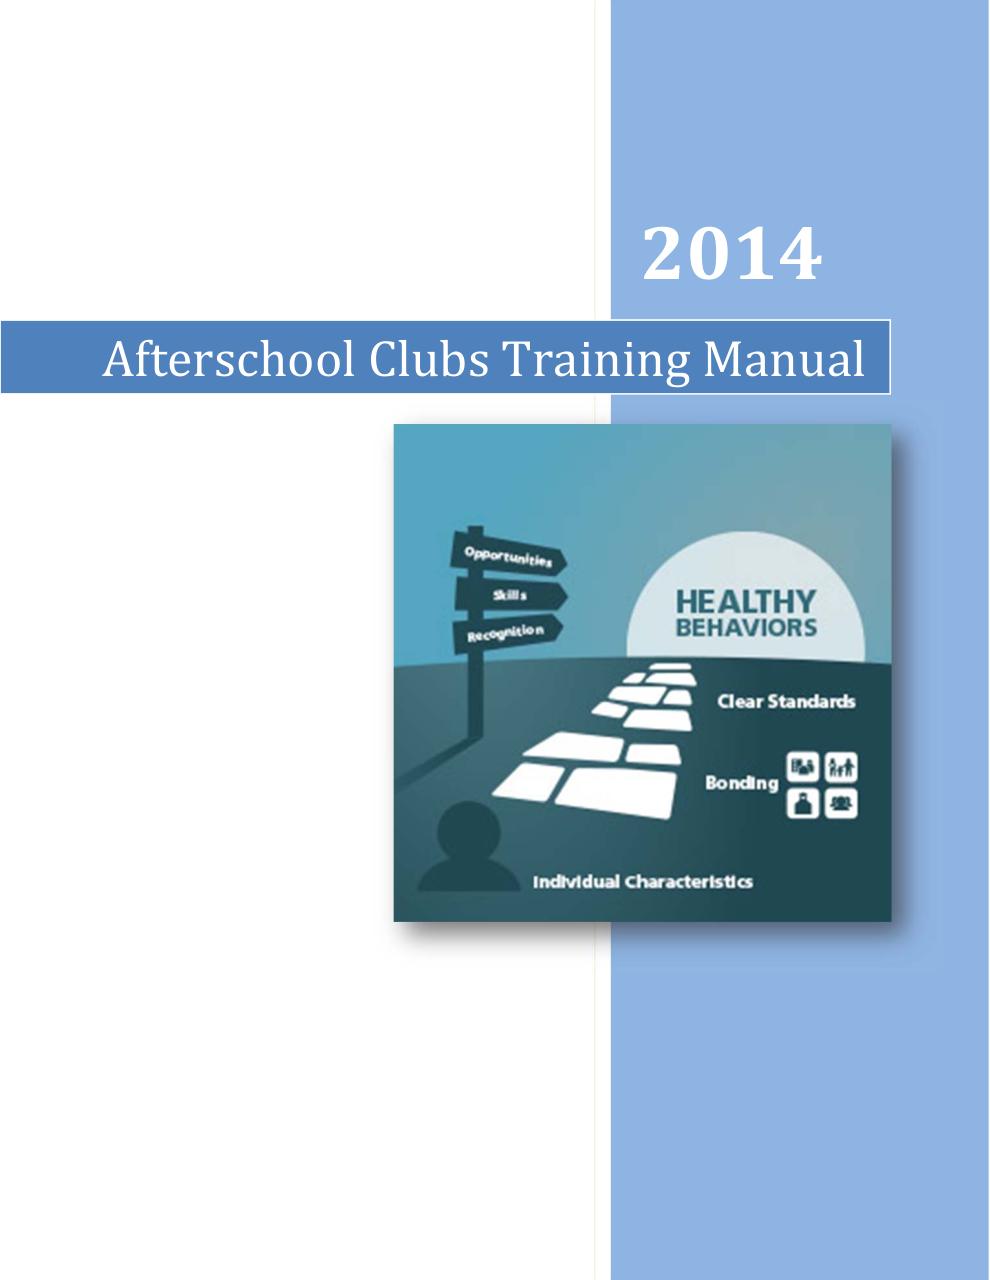 Afterschool Clubs Manual.pdf - page 1/14